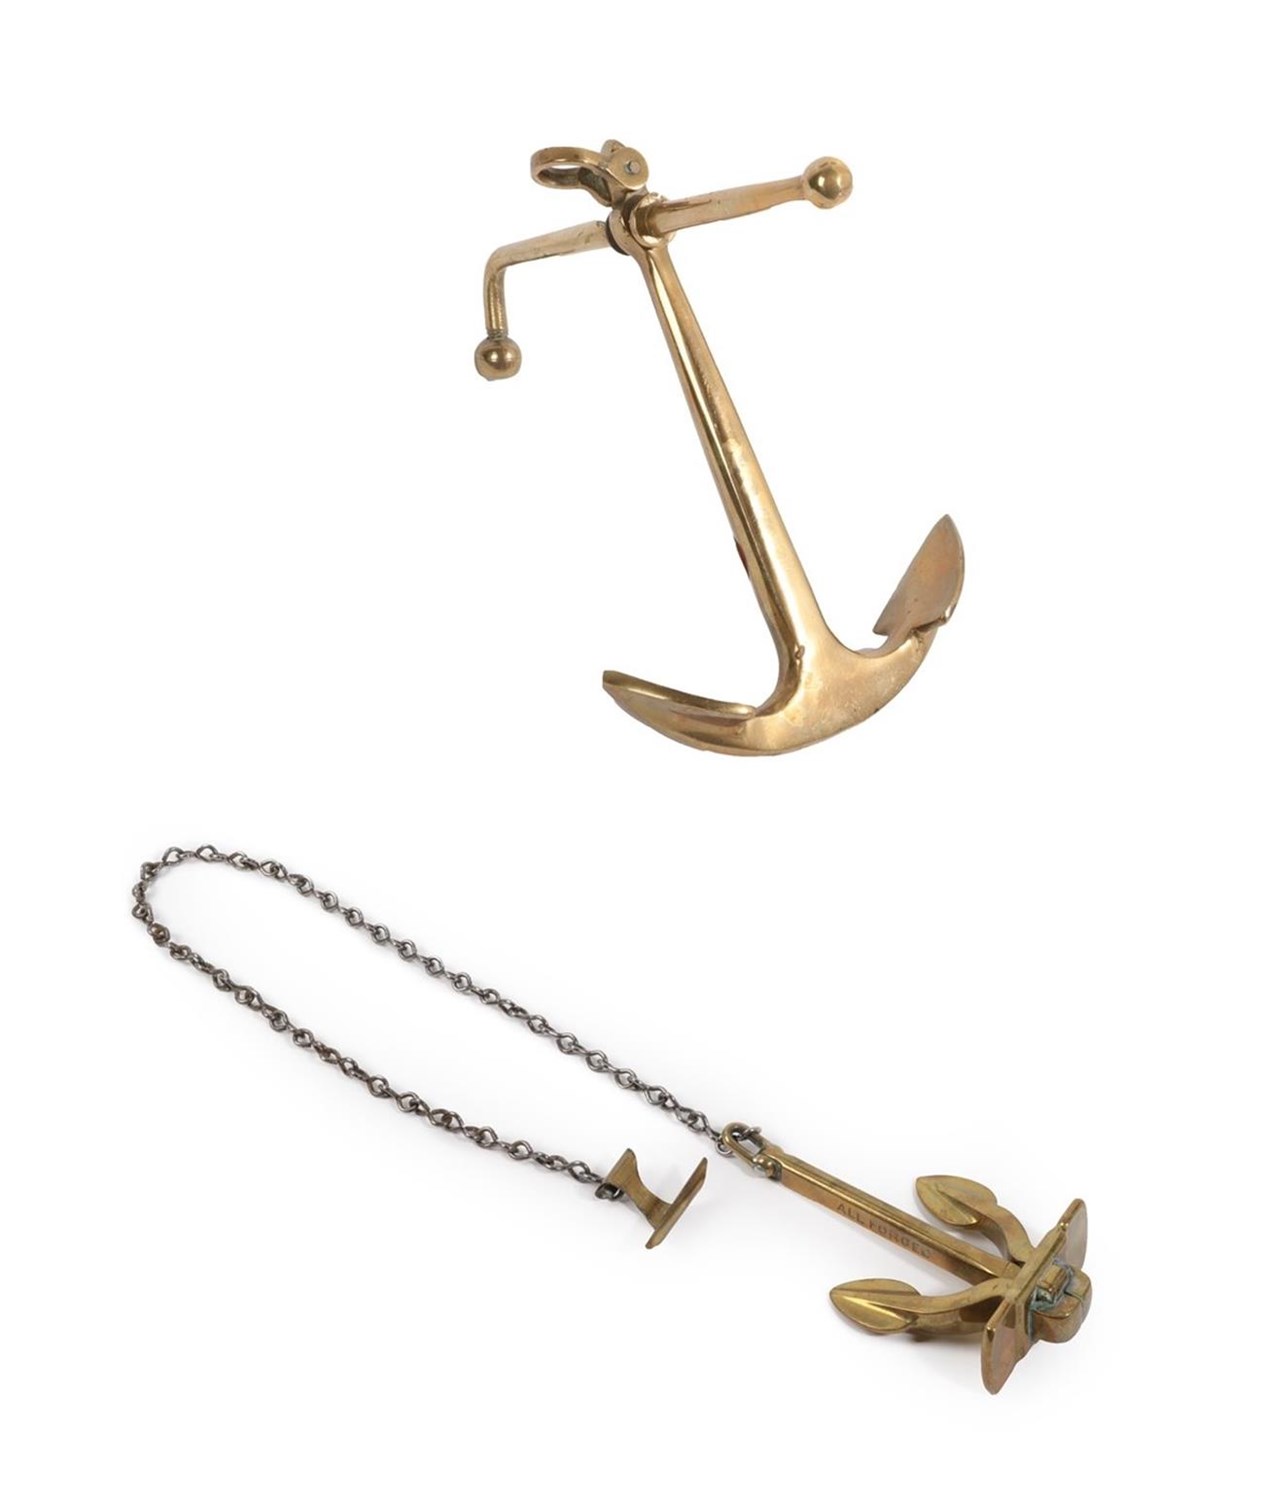 Lot 232 - A Taylor's Dreadnought Type Miniature Anchor, early 20th century, possibly a salesman's sample,...